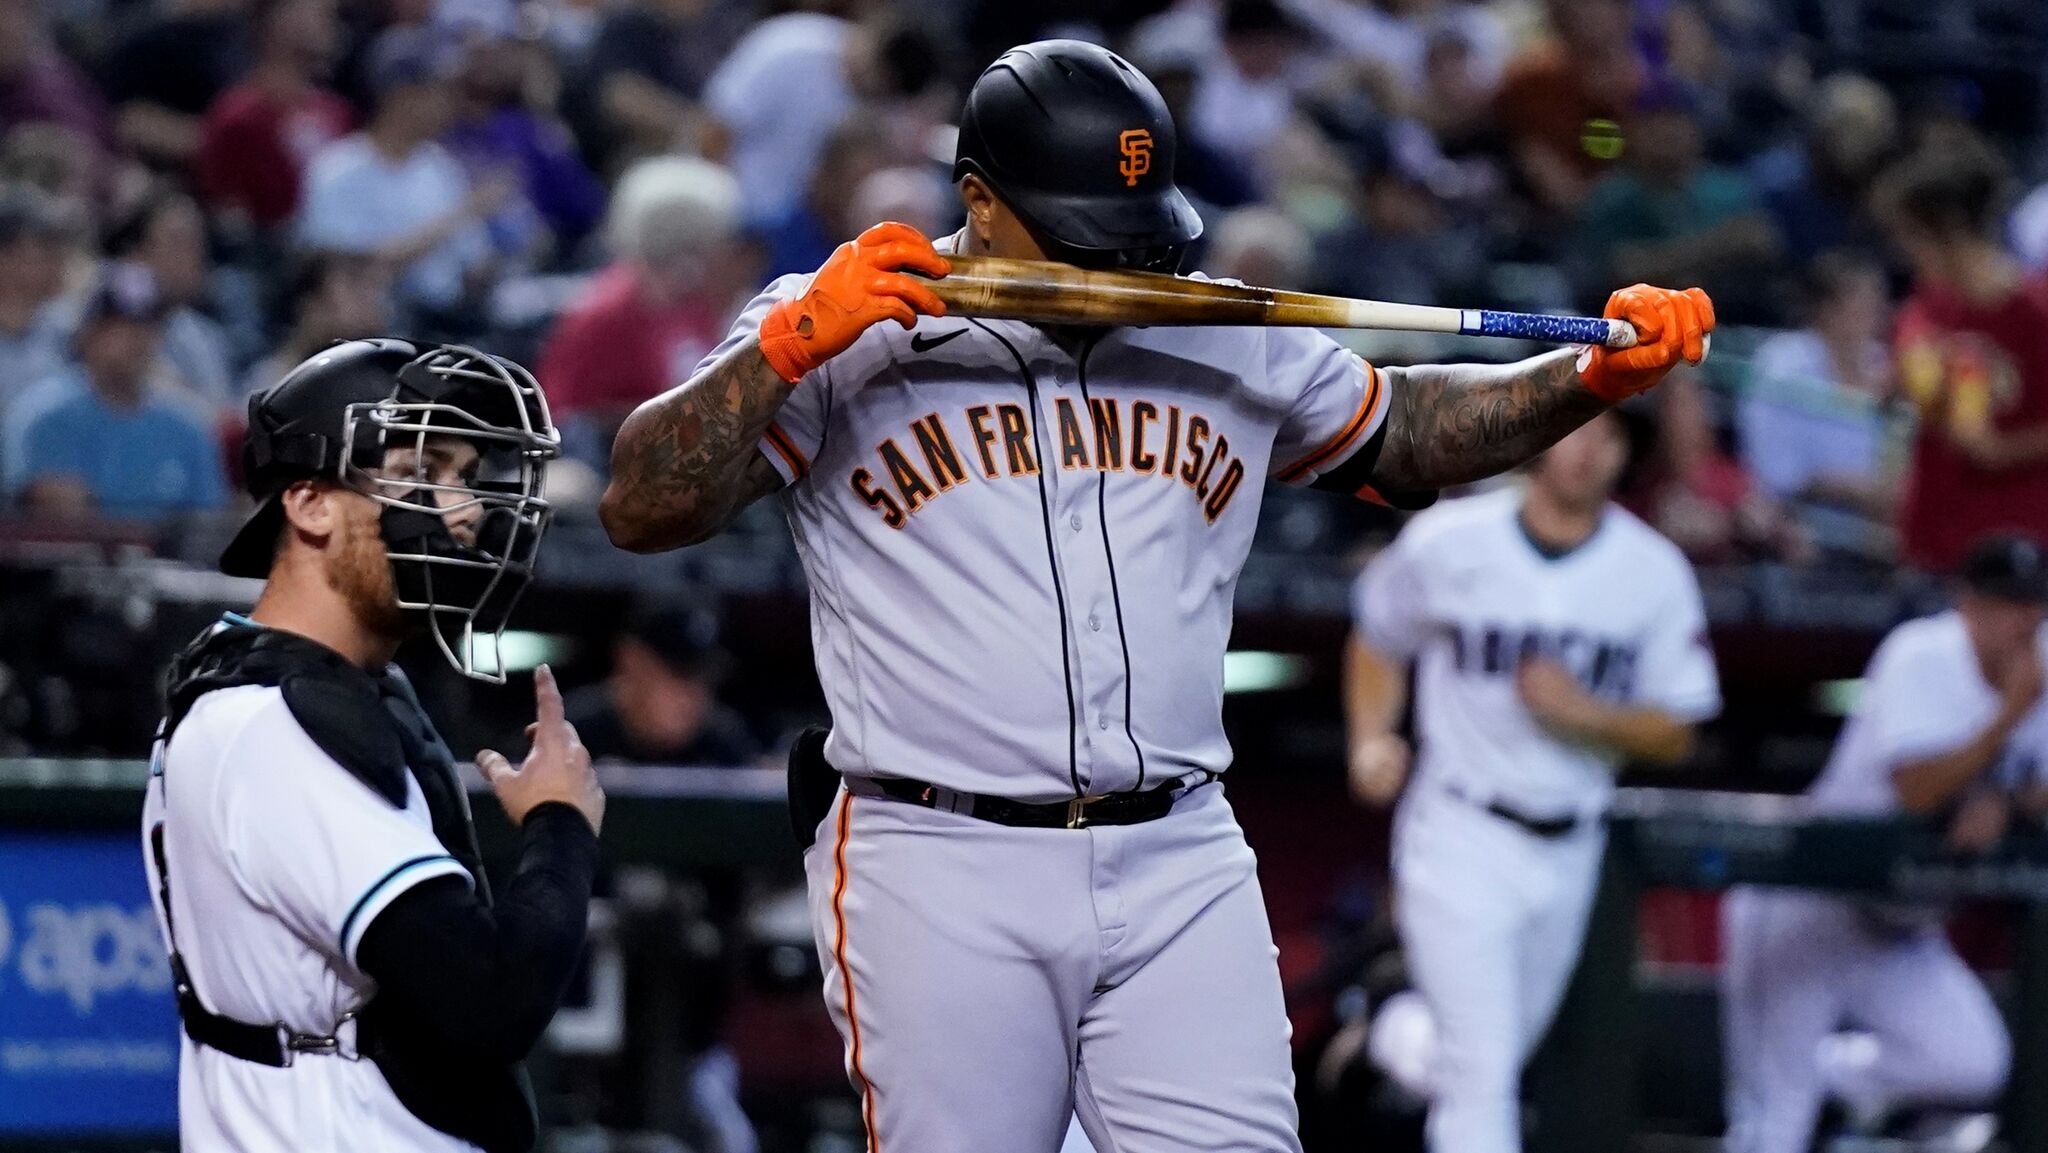 KSTS 48 teams up with SF Giants - Media Moves